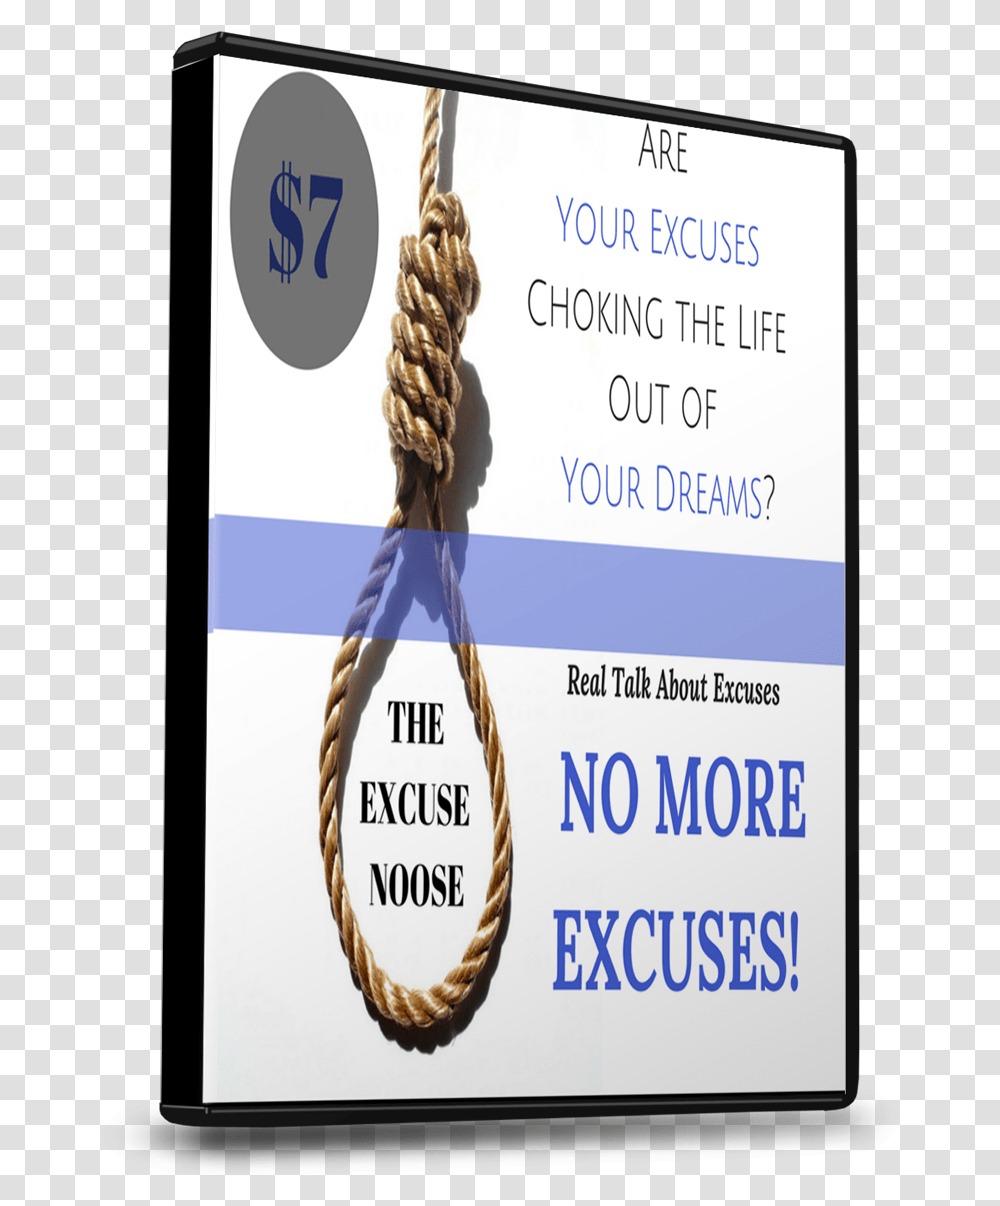 Download The Excuse Noose Image Medal, Text, Label, Hair, Rope Transparent Png